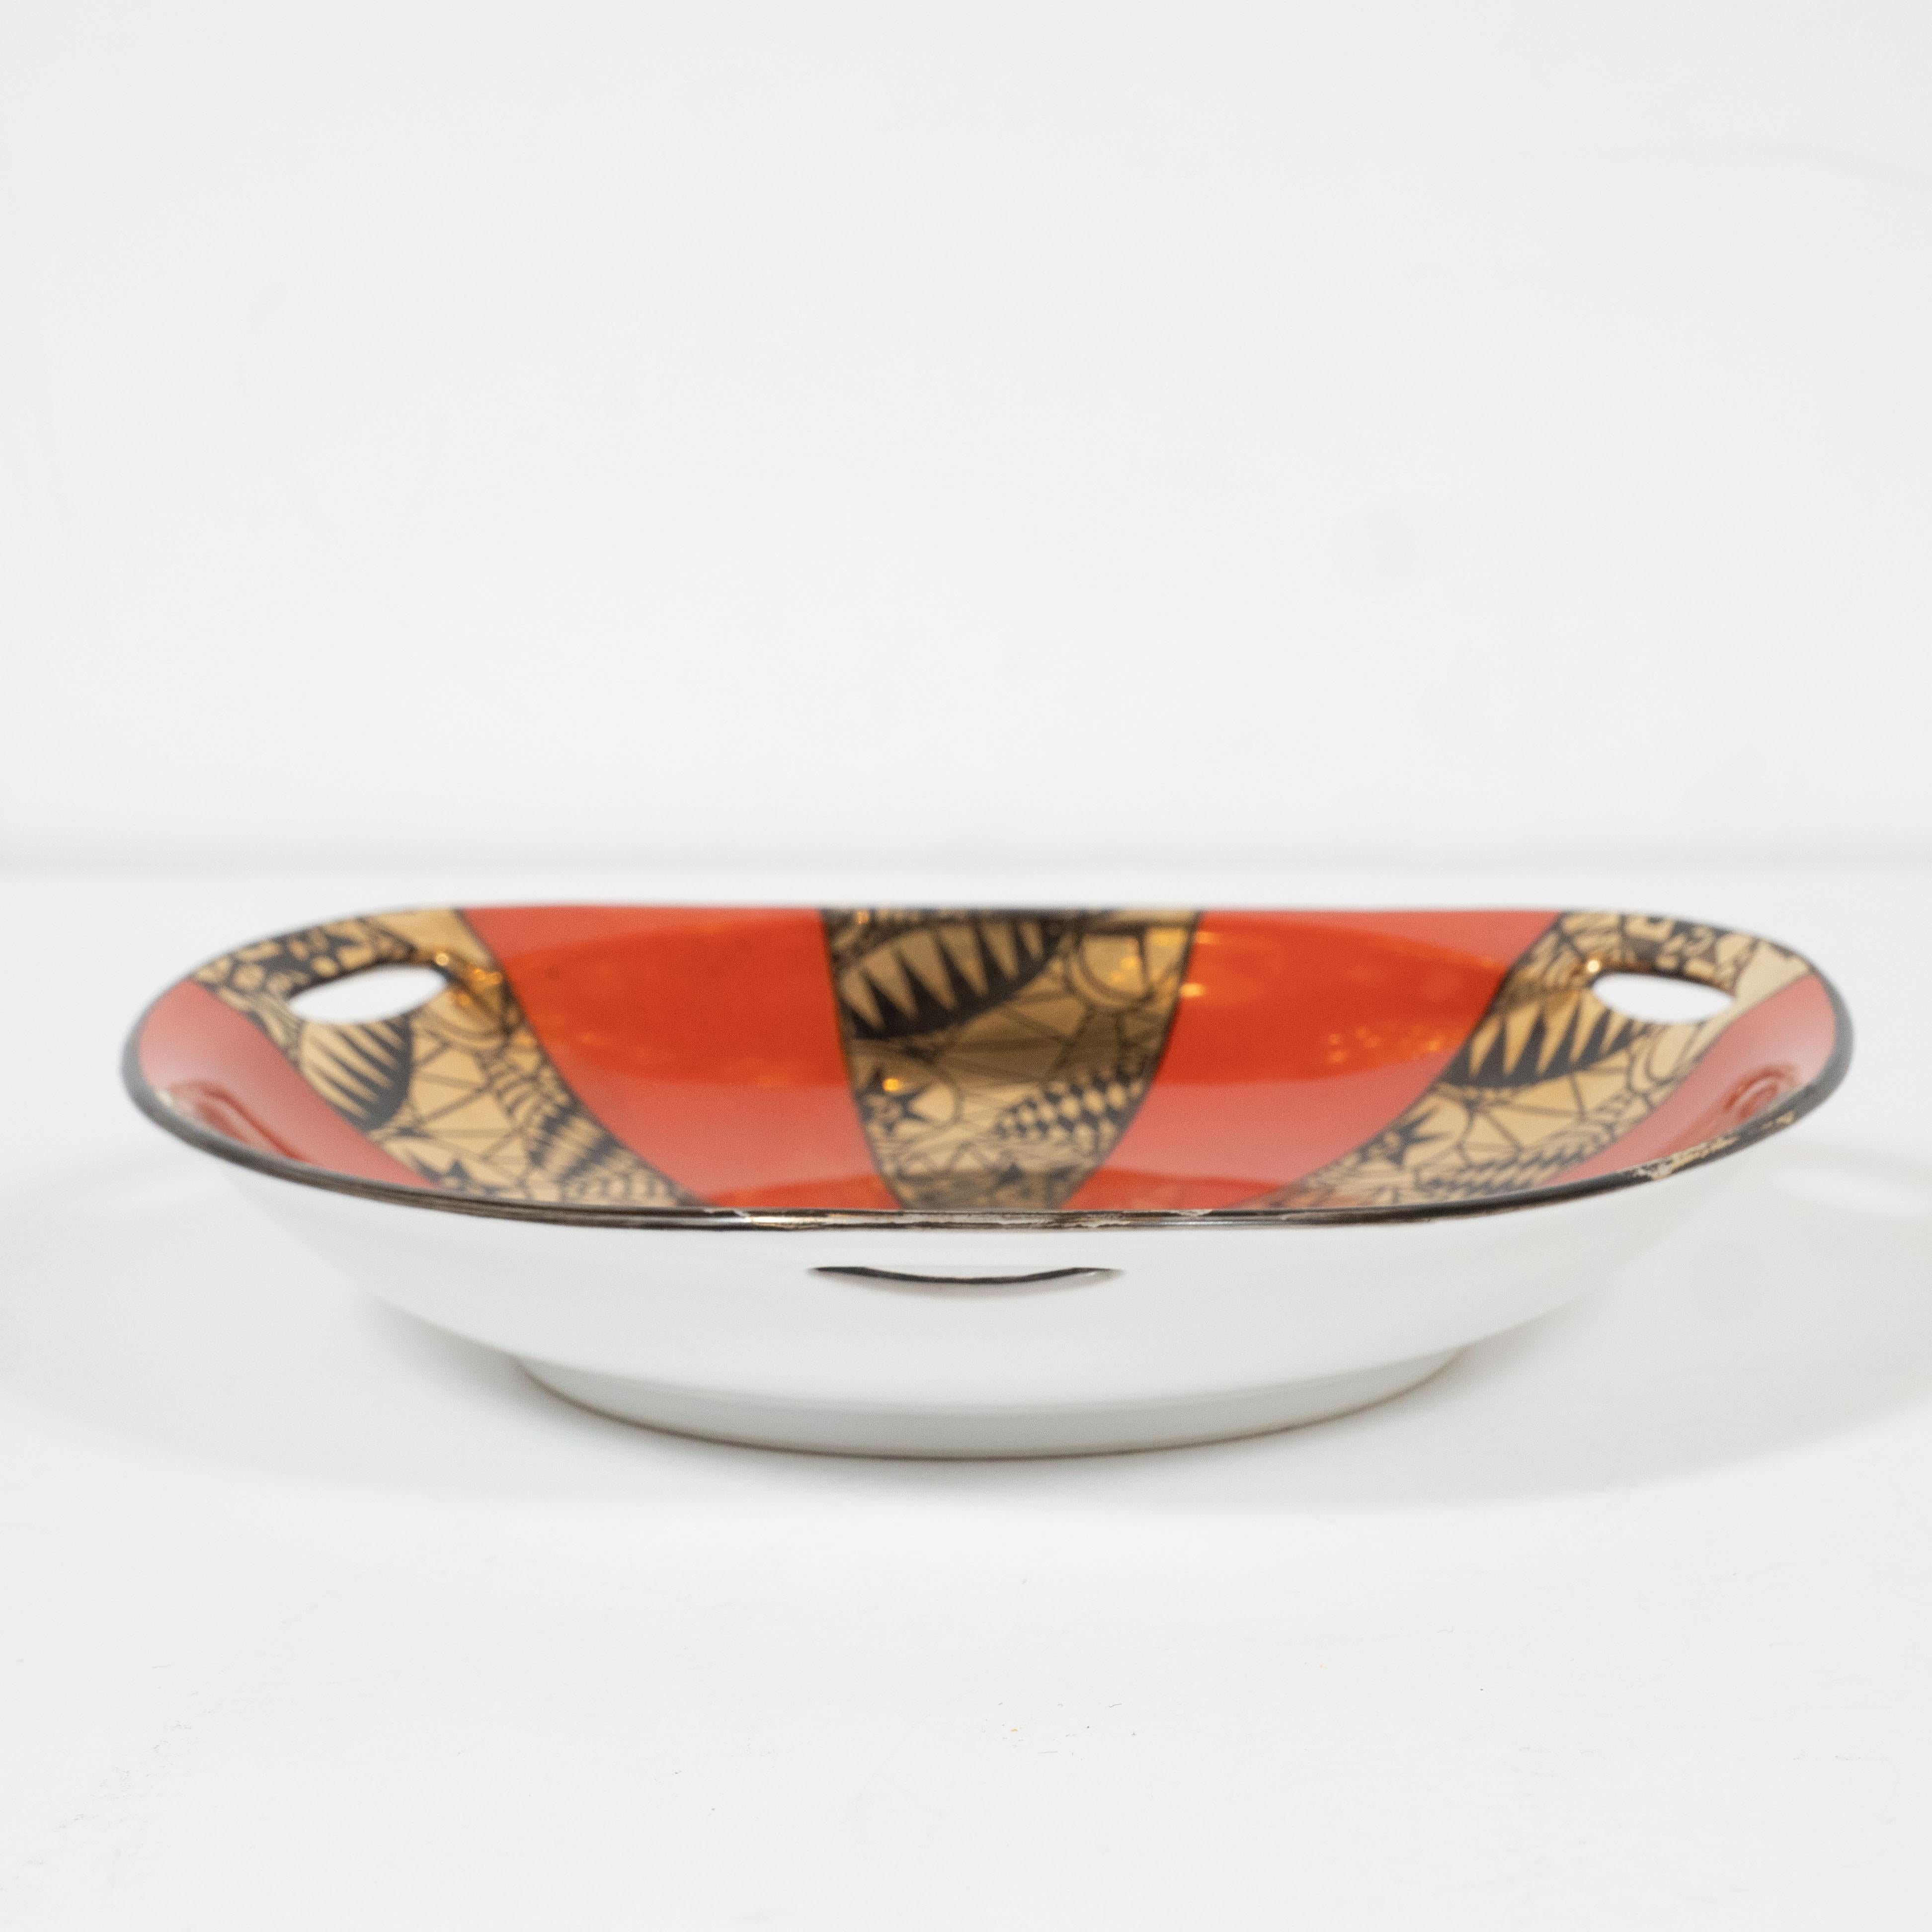 Art Deco Gold/Burnt Persimmon Porcelain Dish by Noritake with Cubist Detailing 2